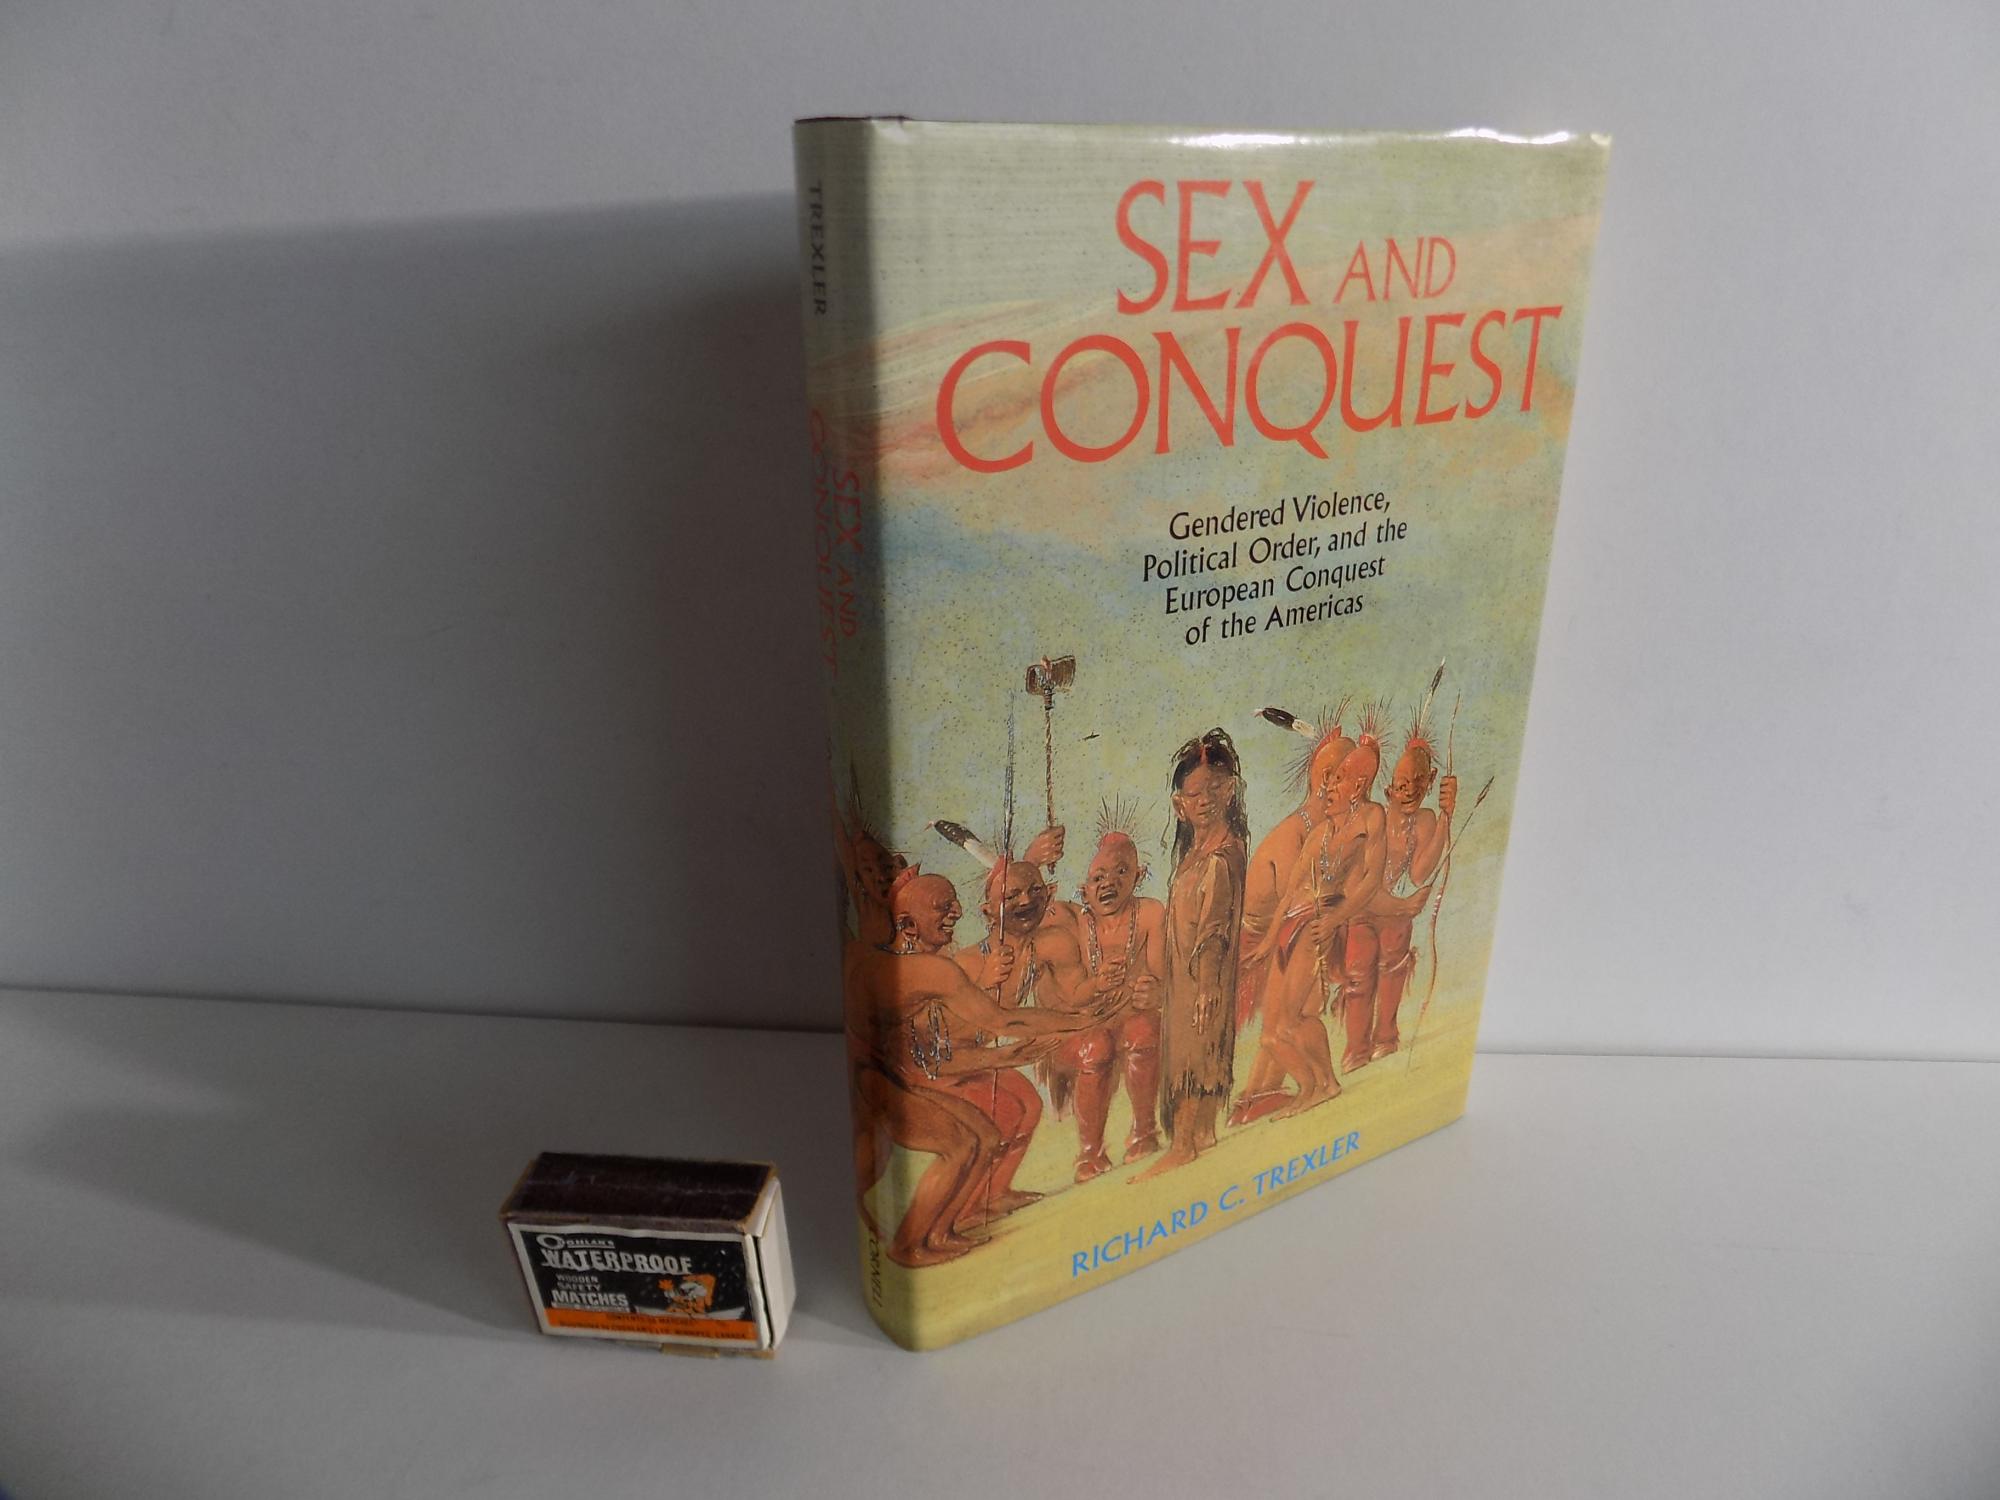 [Amerika:] Sex and Conquest. Gendered Violence, Political Order, and the European Conquest of the Americas. With 11 figures. - Trexler, Richard C.